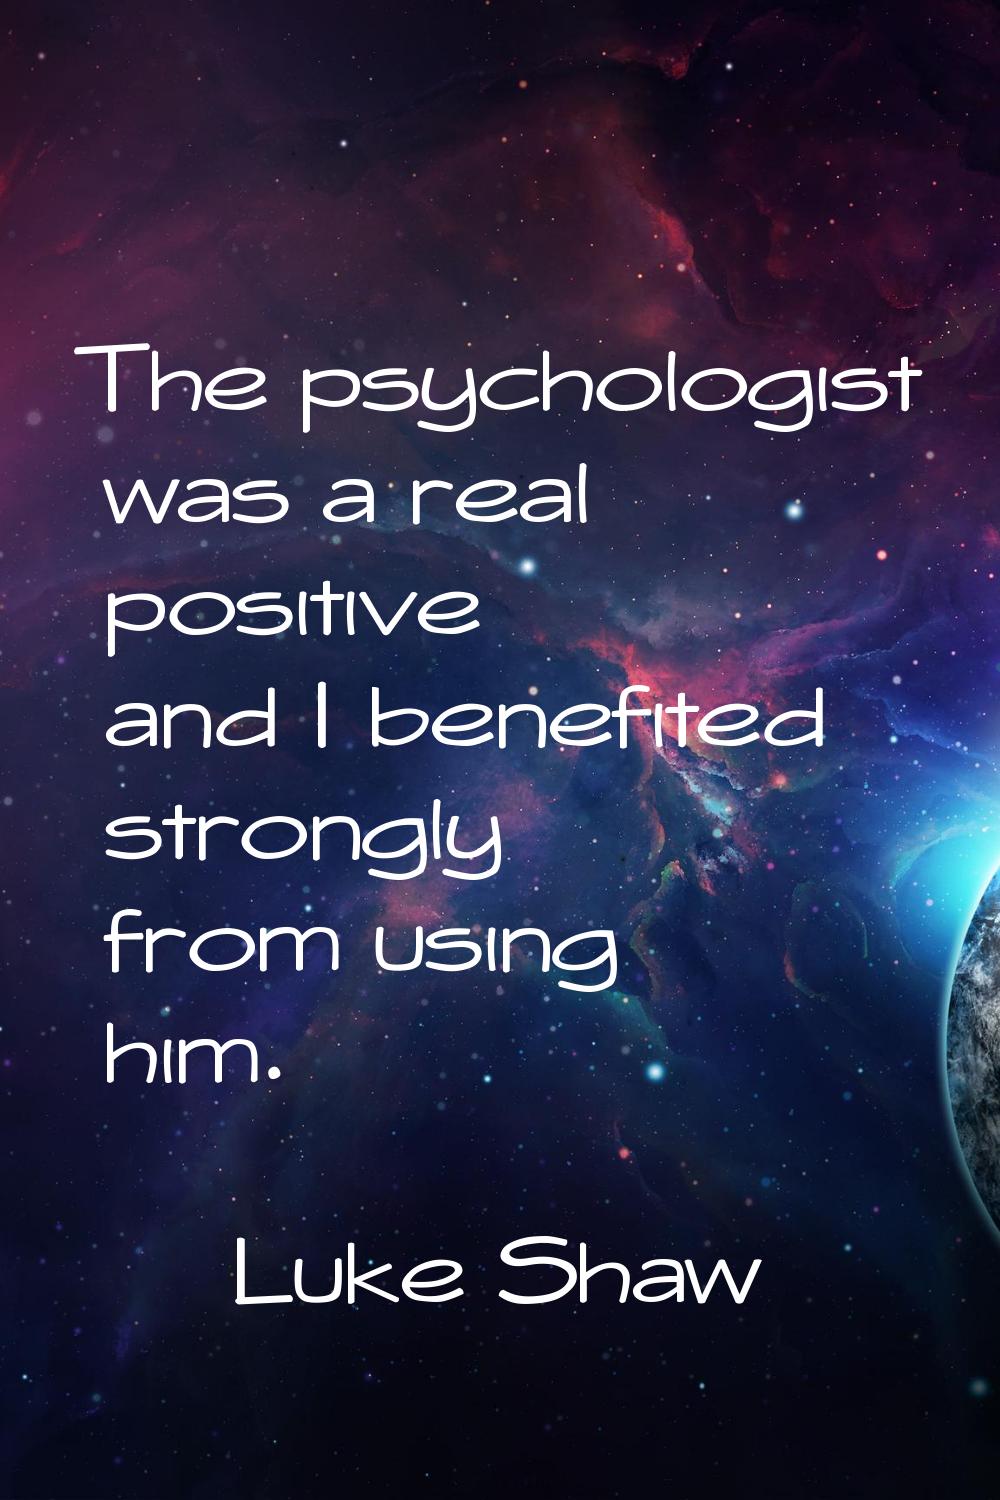 The psychologist was a real positive and I benefited strongly from using him.